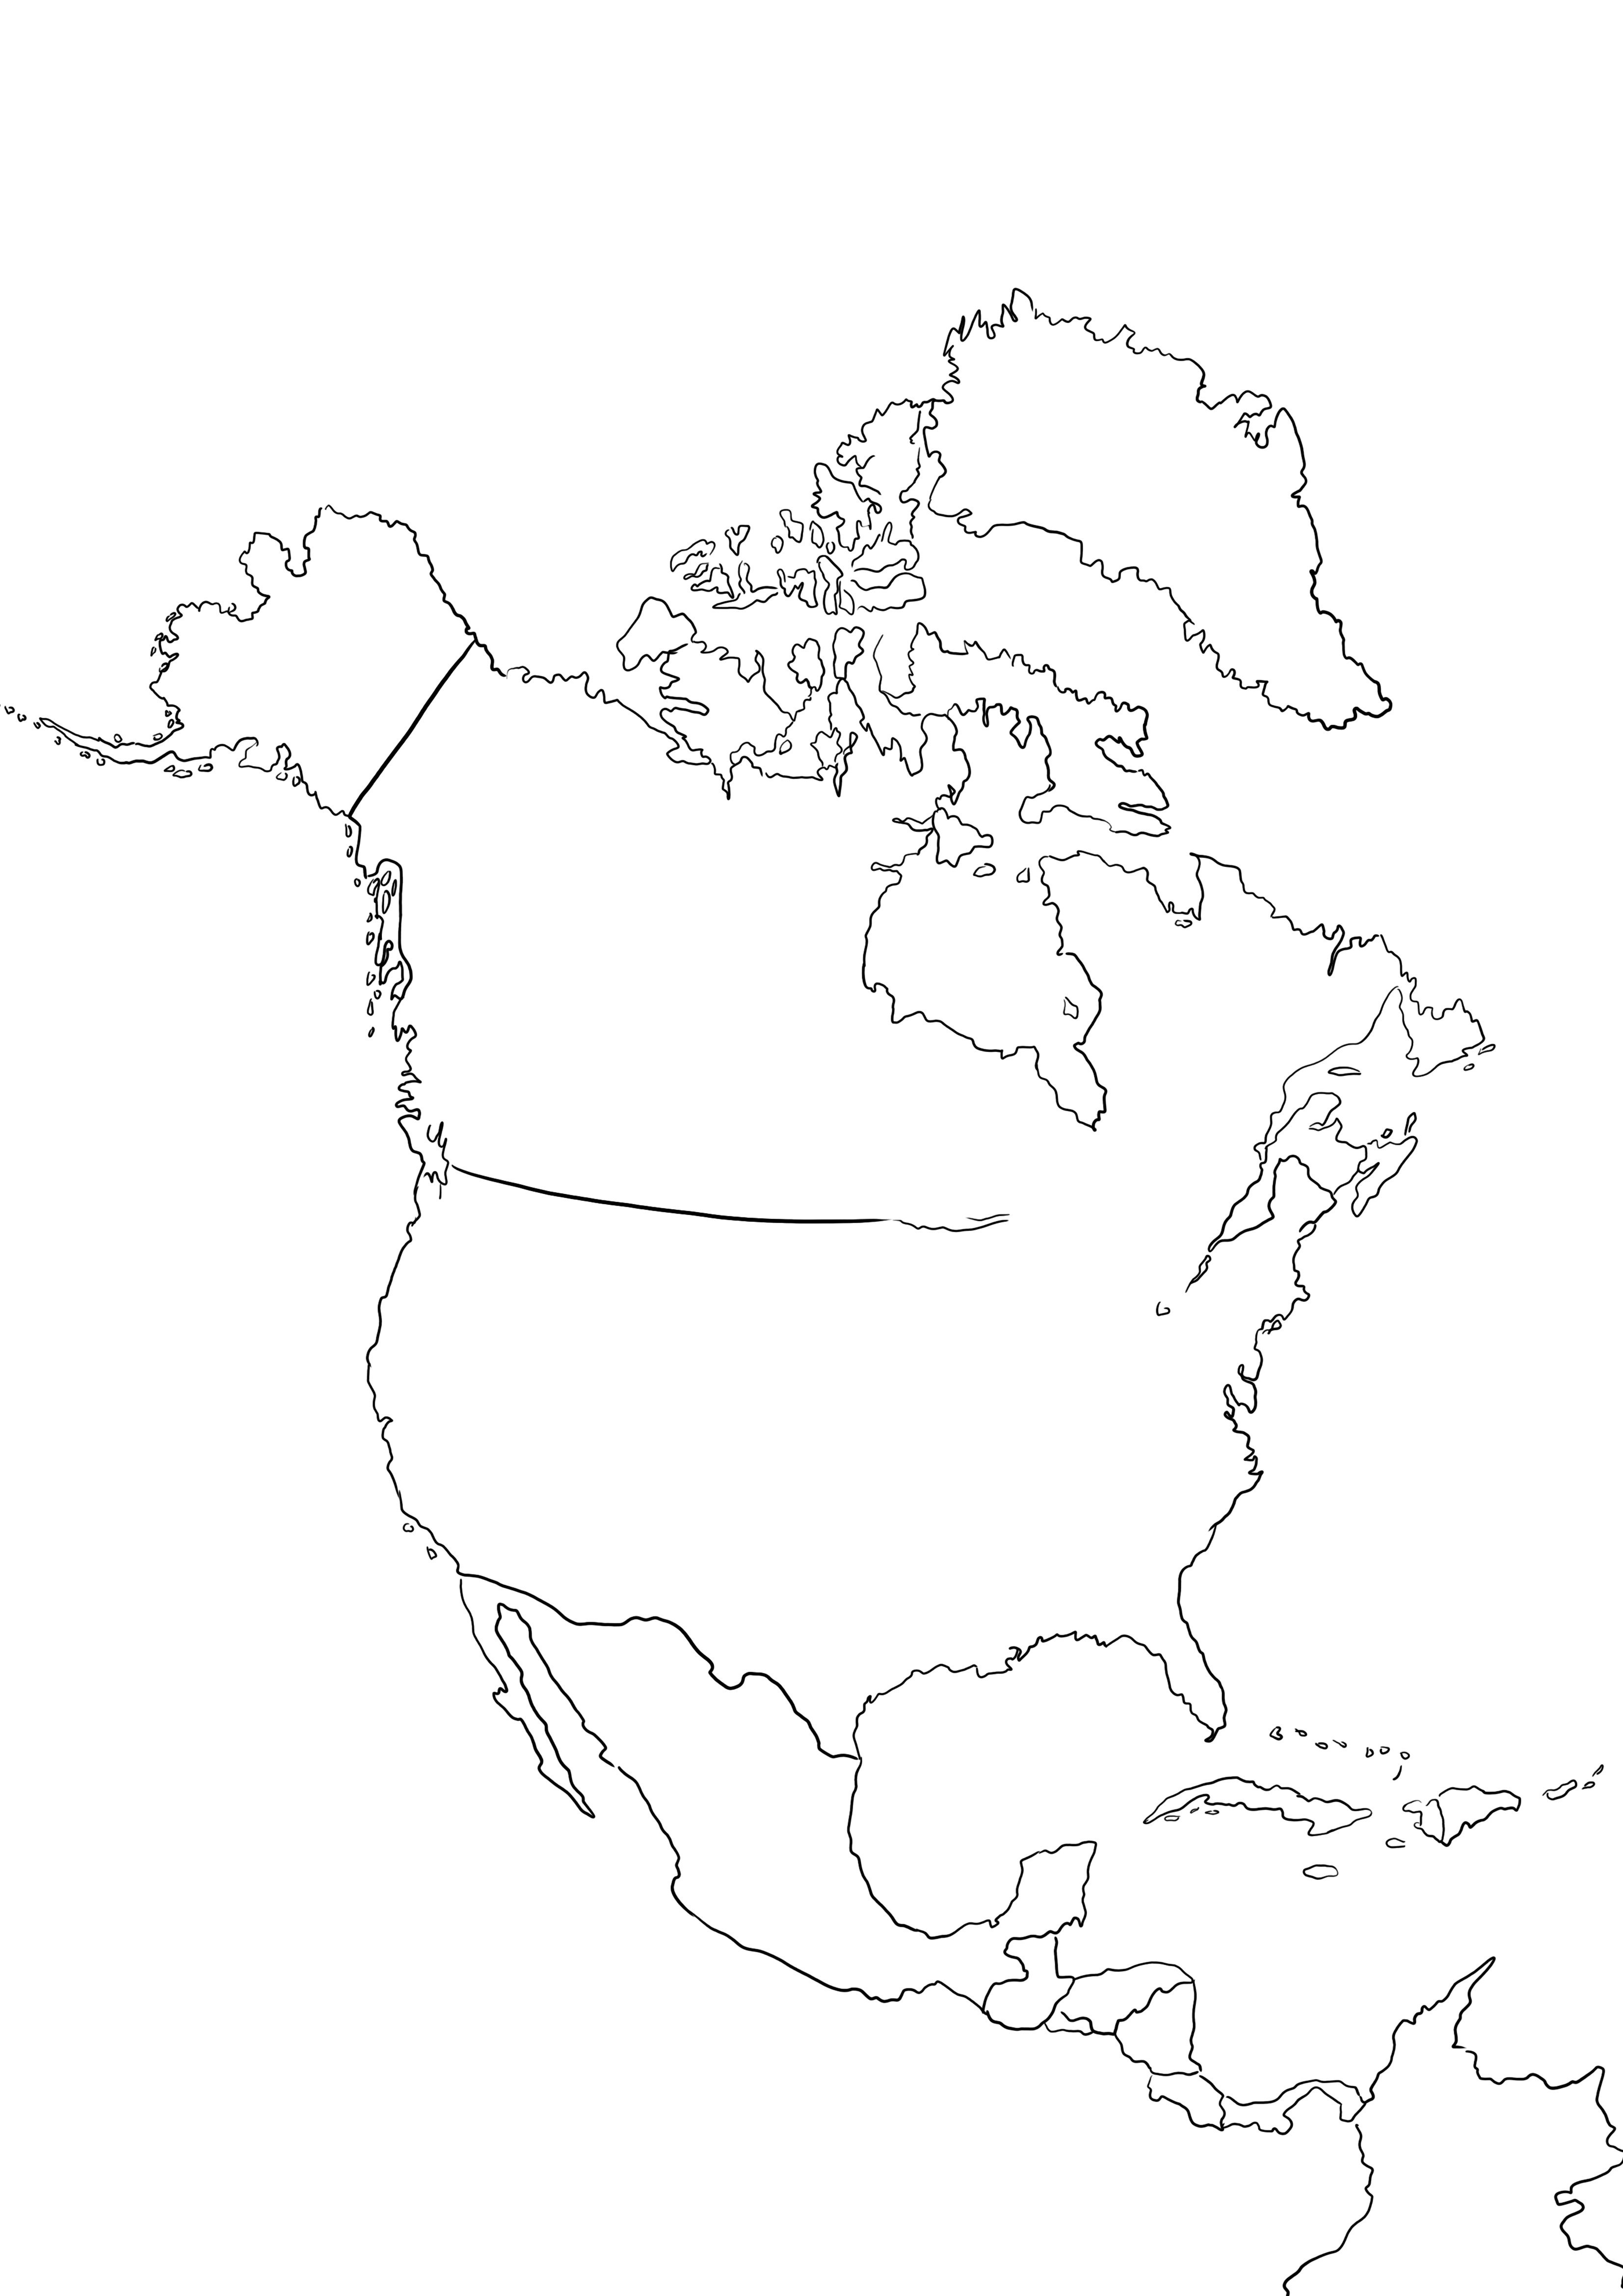 North America Map free printable and coloring picture for kids to learn about countries